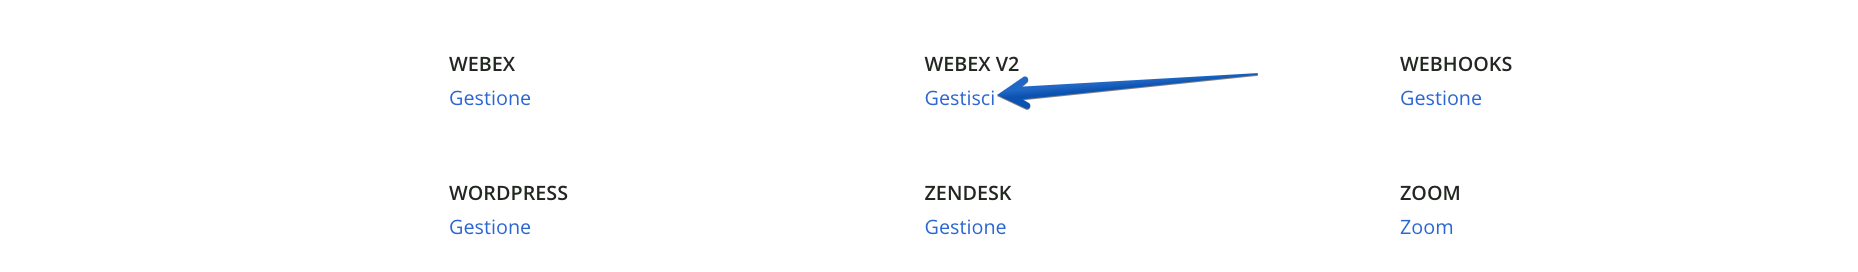 Gestione_Webex.png